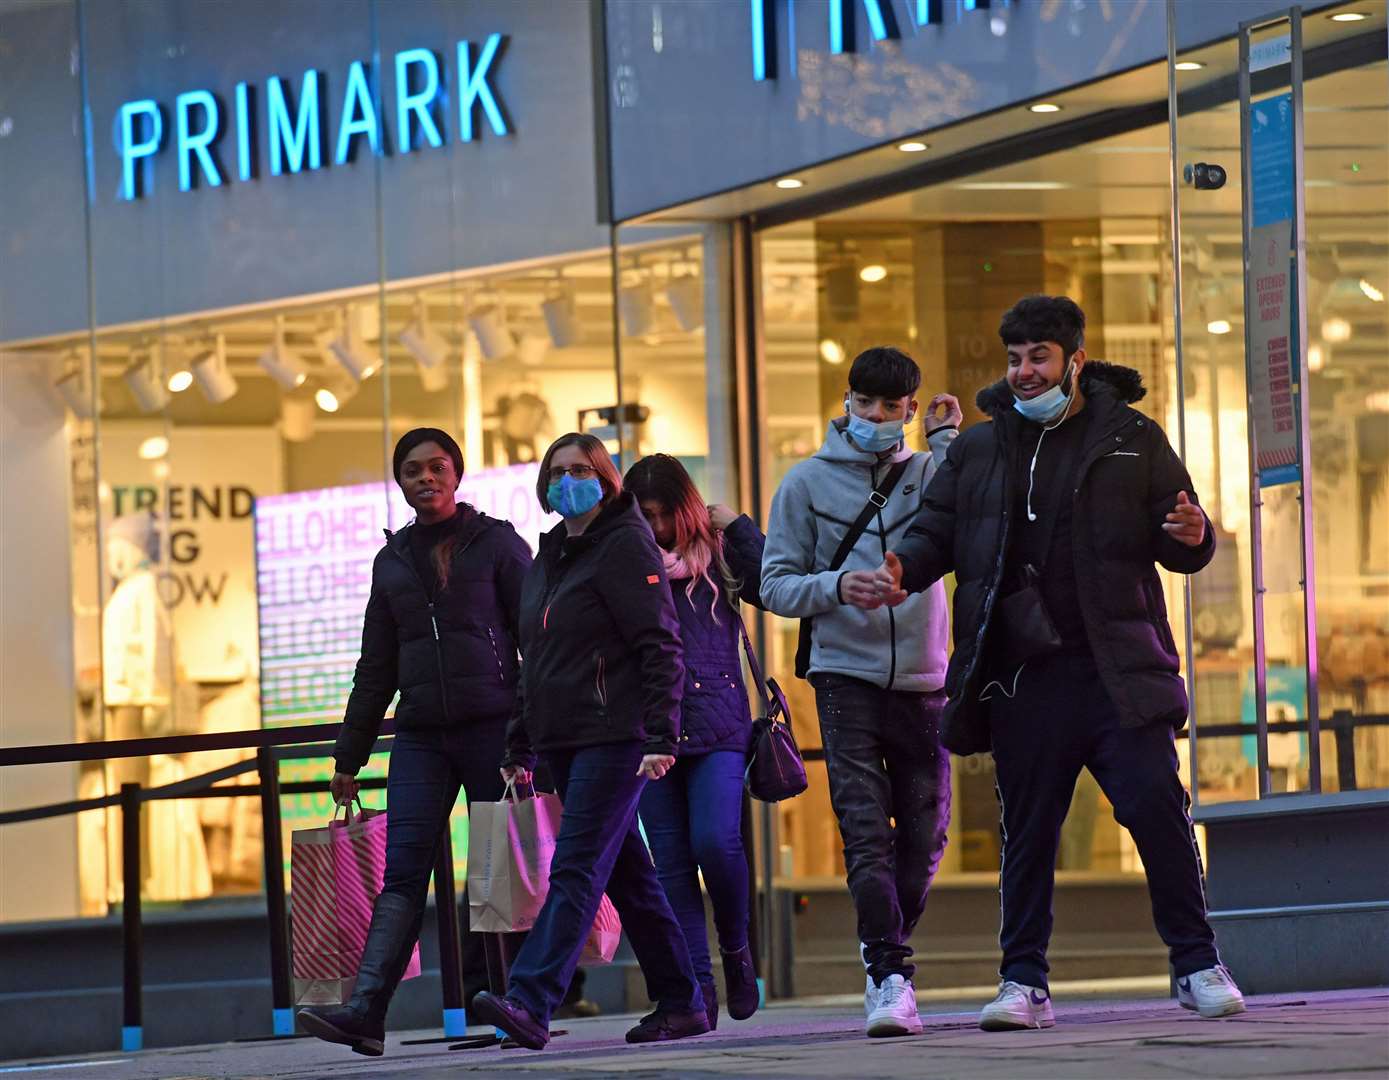 Customers spent heavily in Primark during the brief December period when stores were allowed to open in the UK (Jacob King/PA)